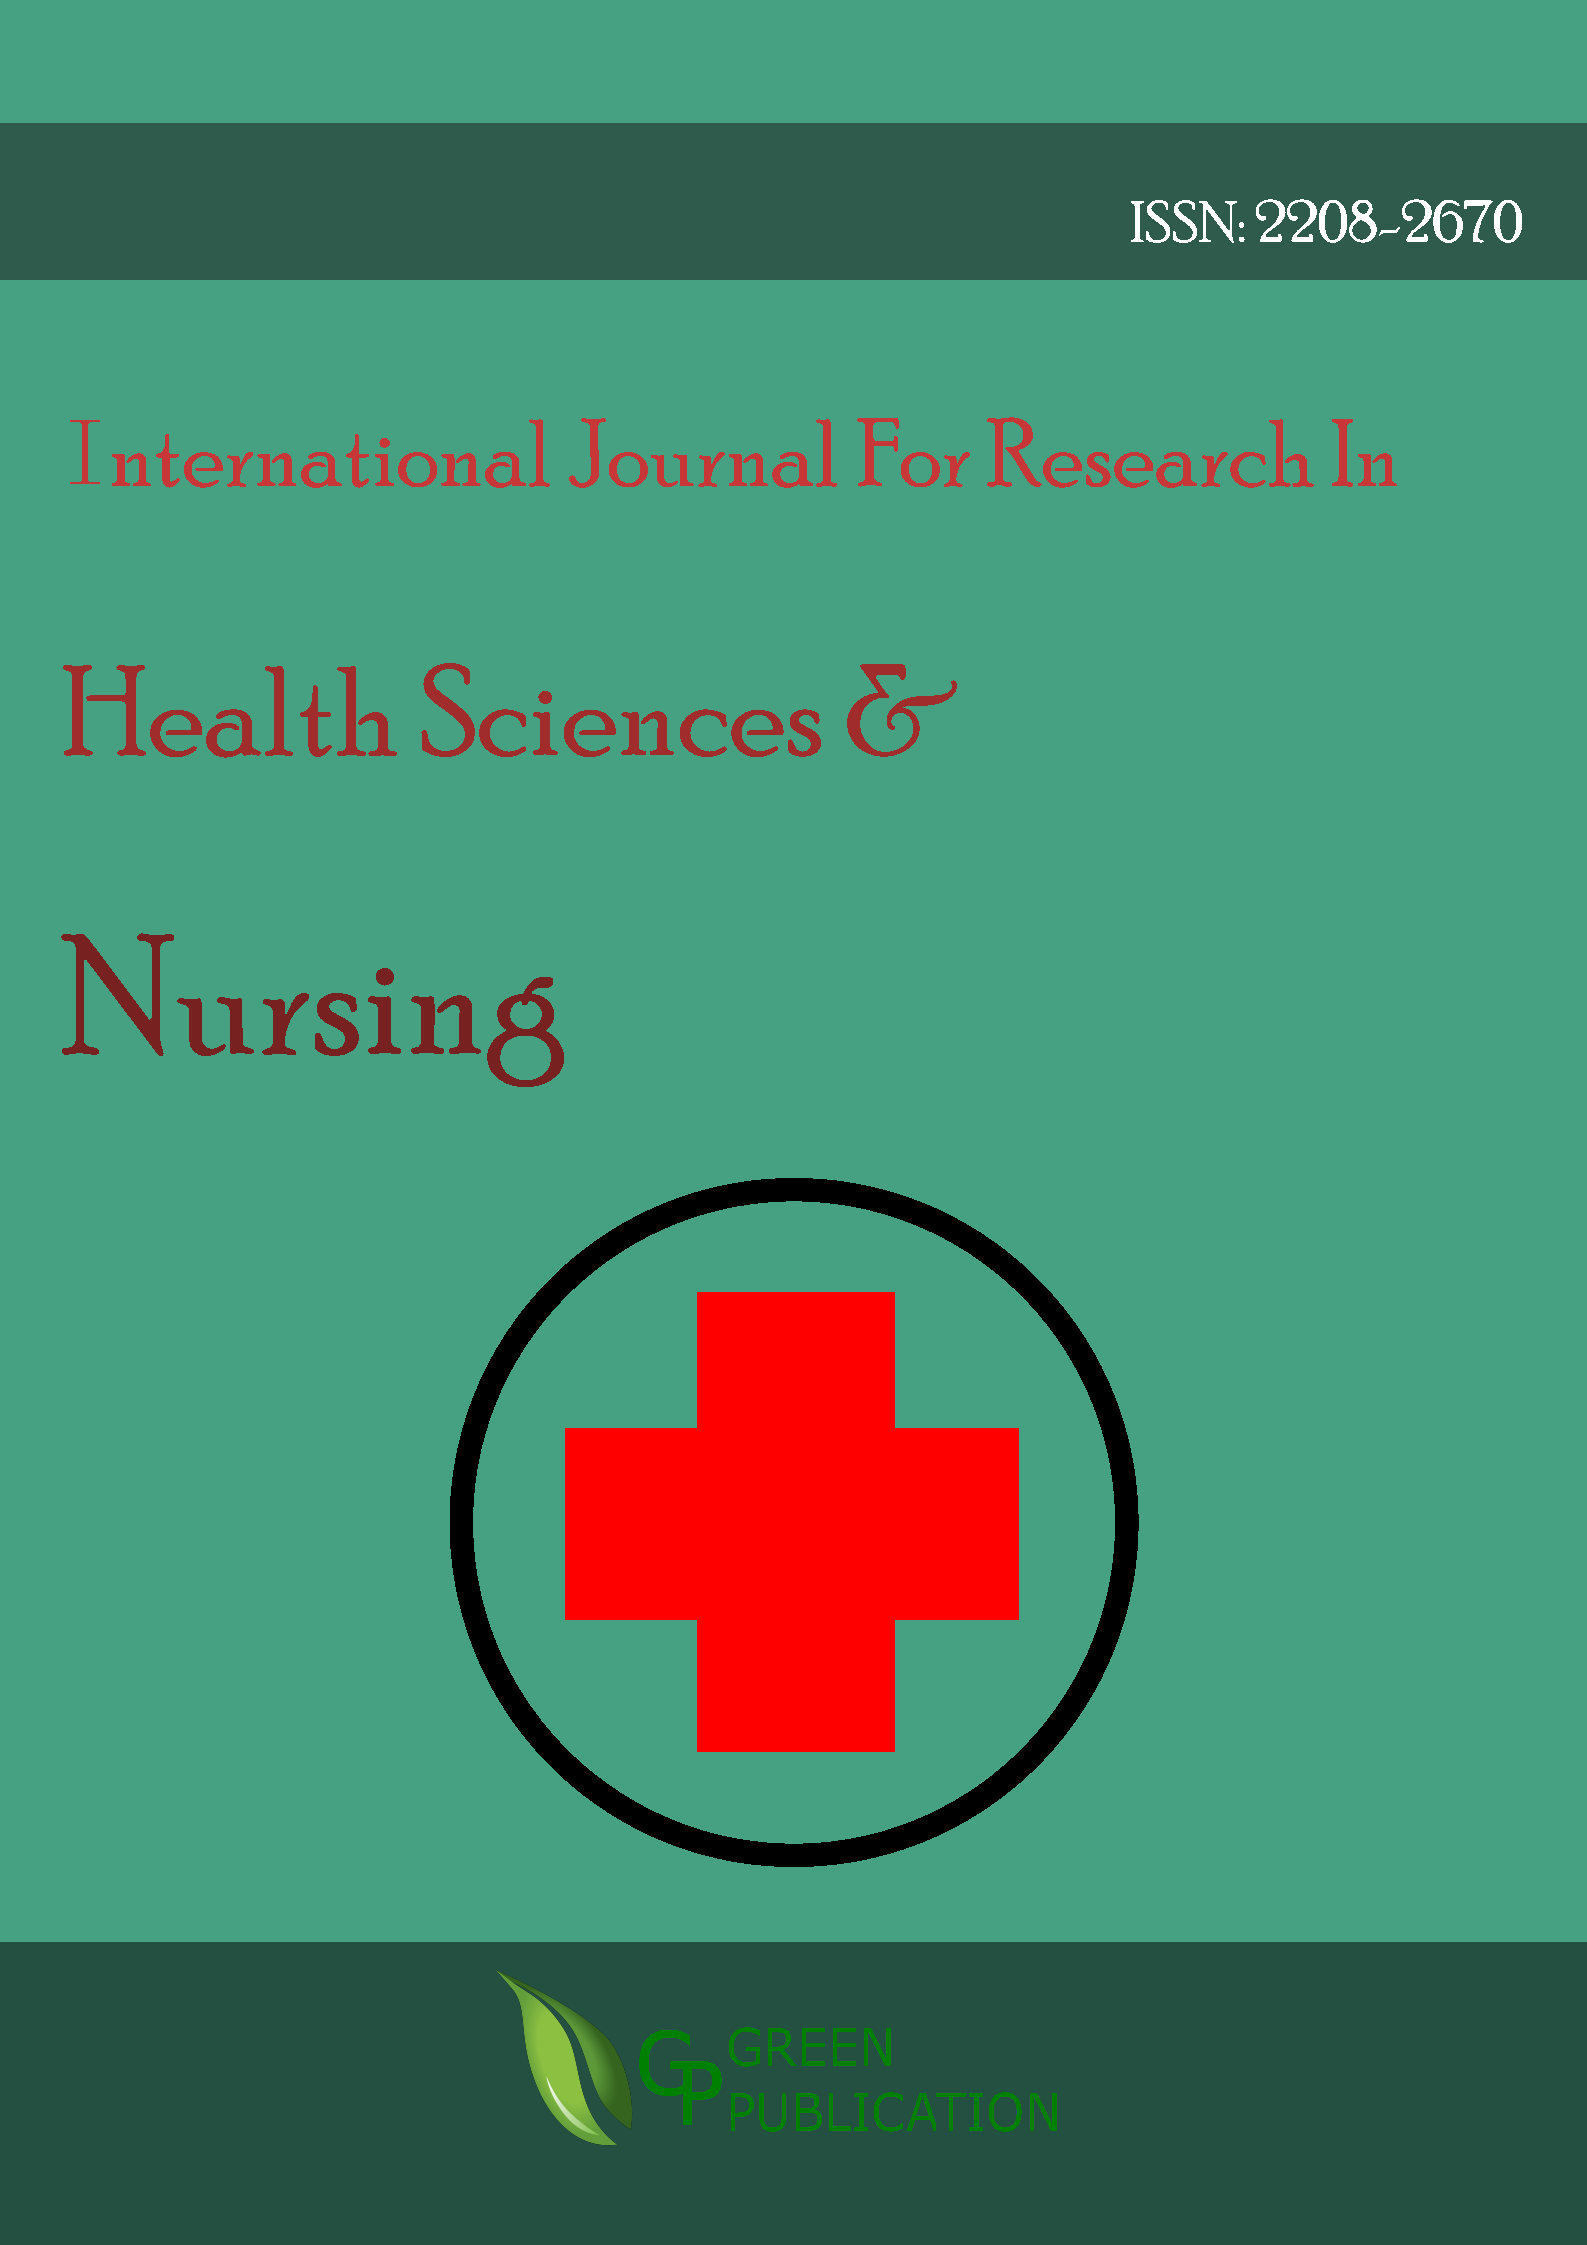 International Journal For Research In Health Sciences And Nursing (ISSN: 2208-2670)